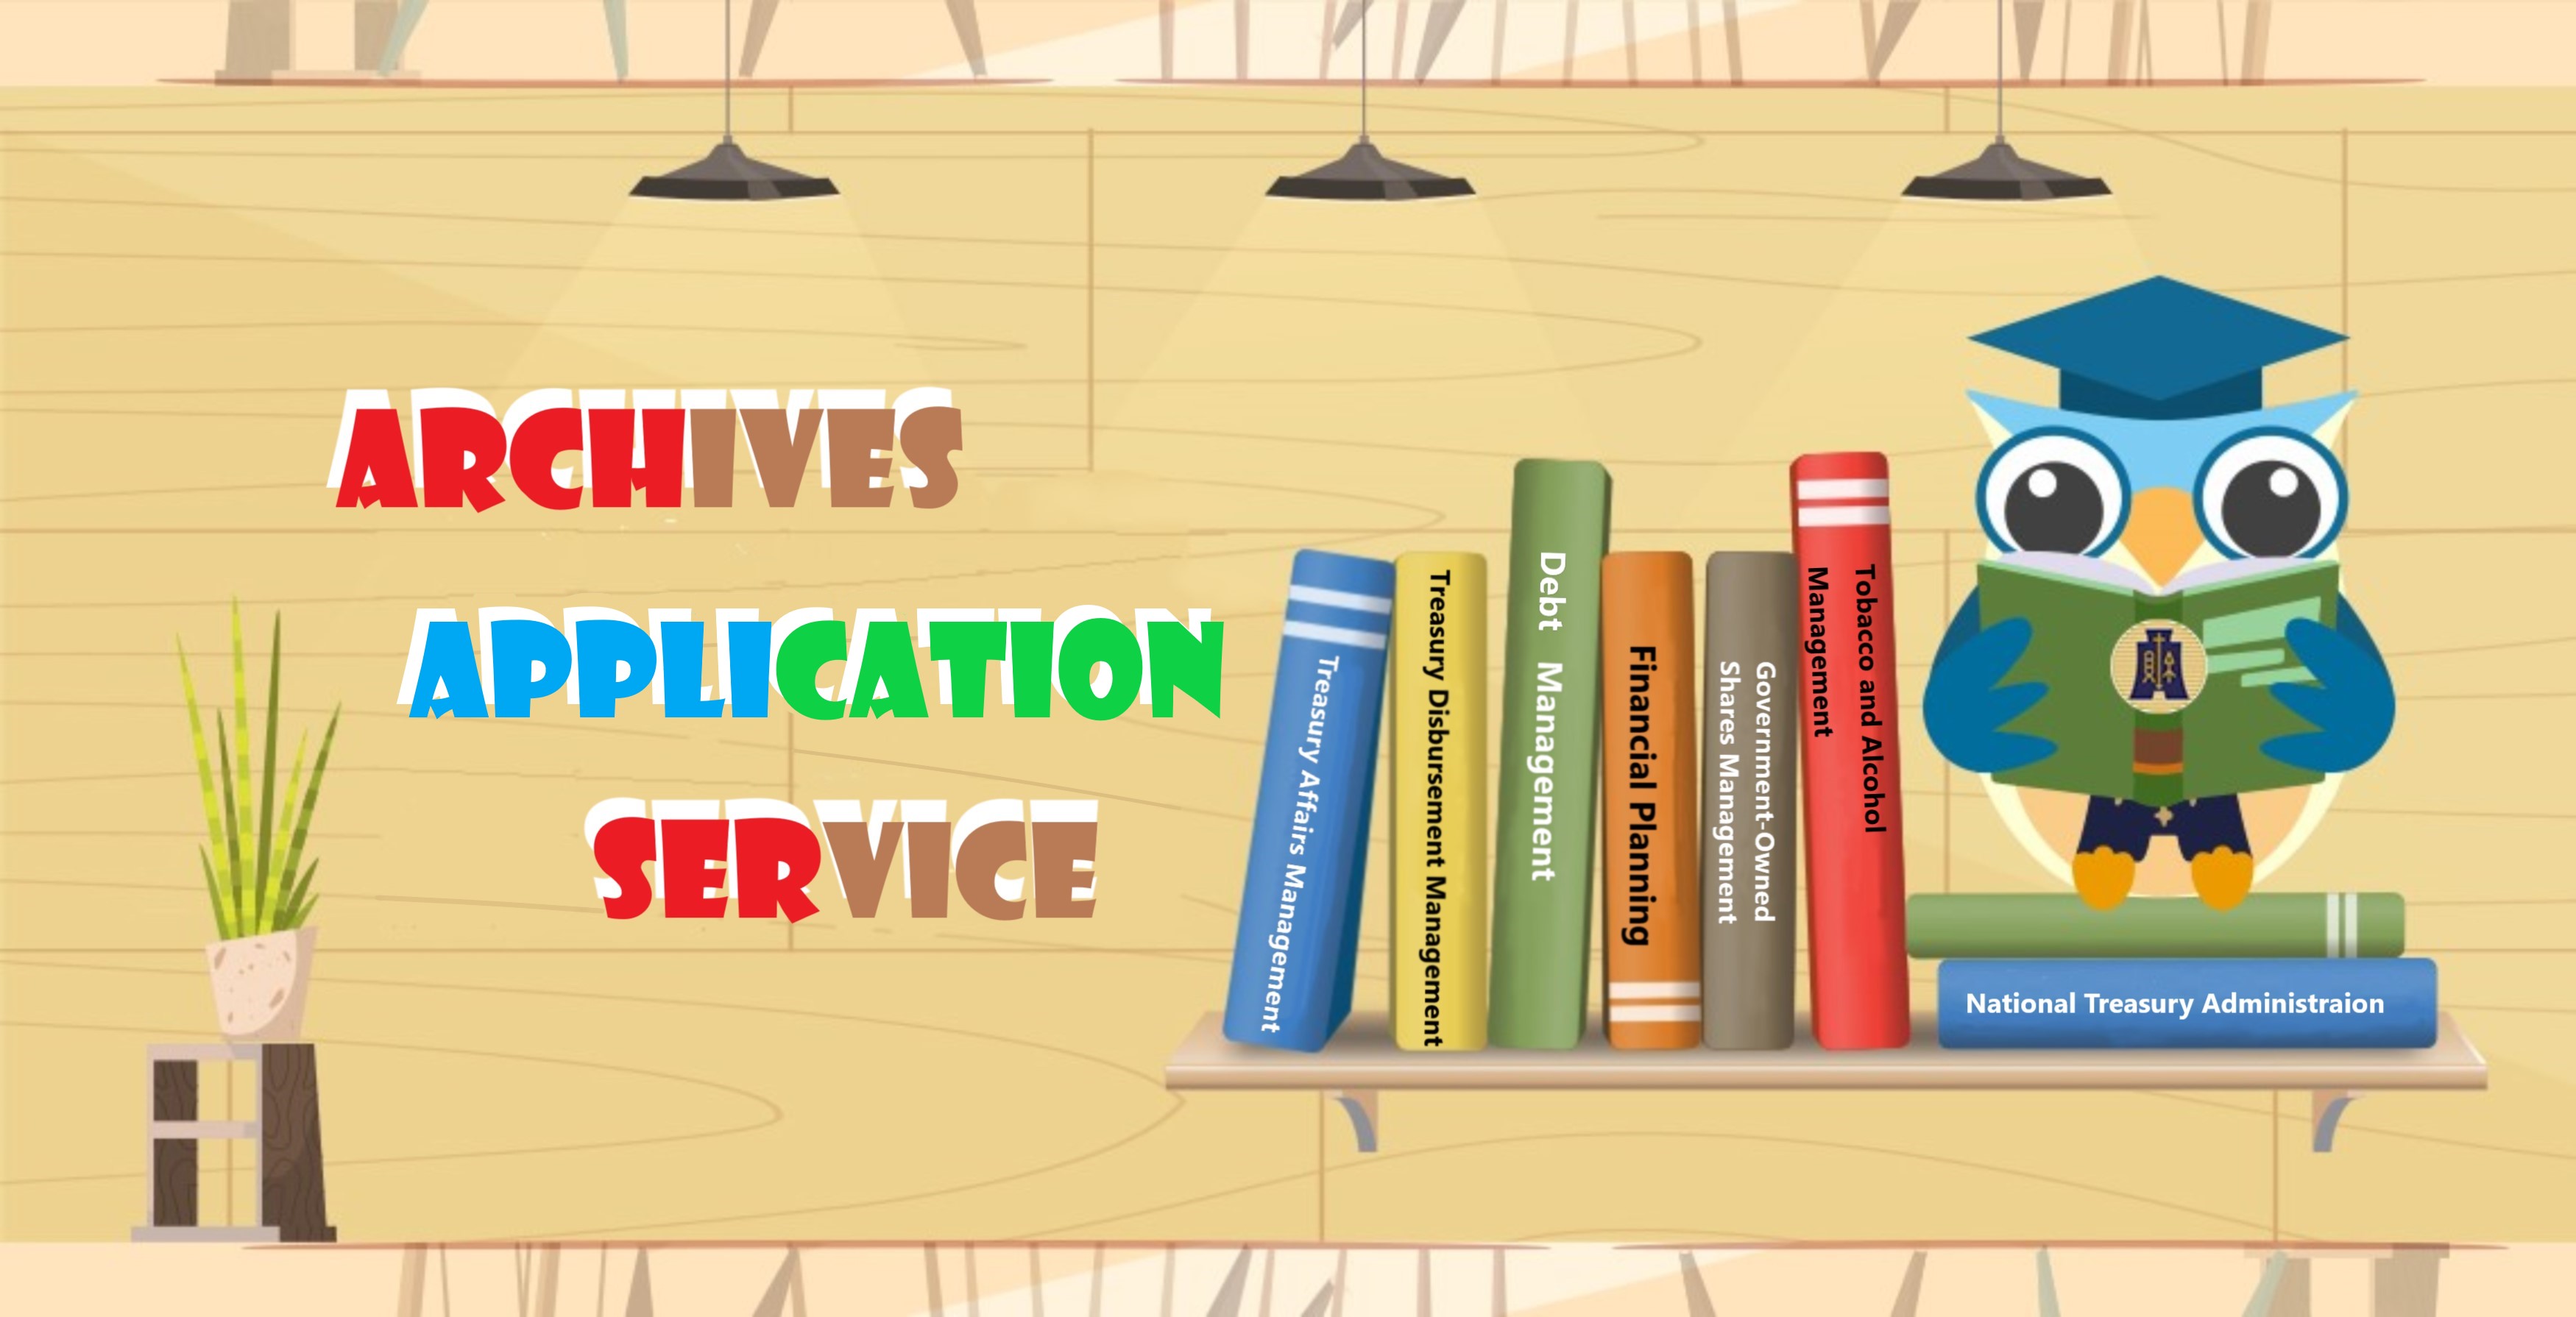 Archives Application Service